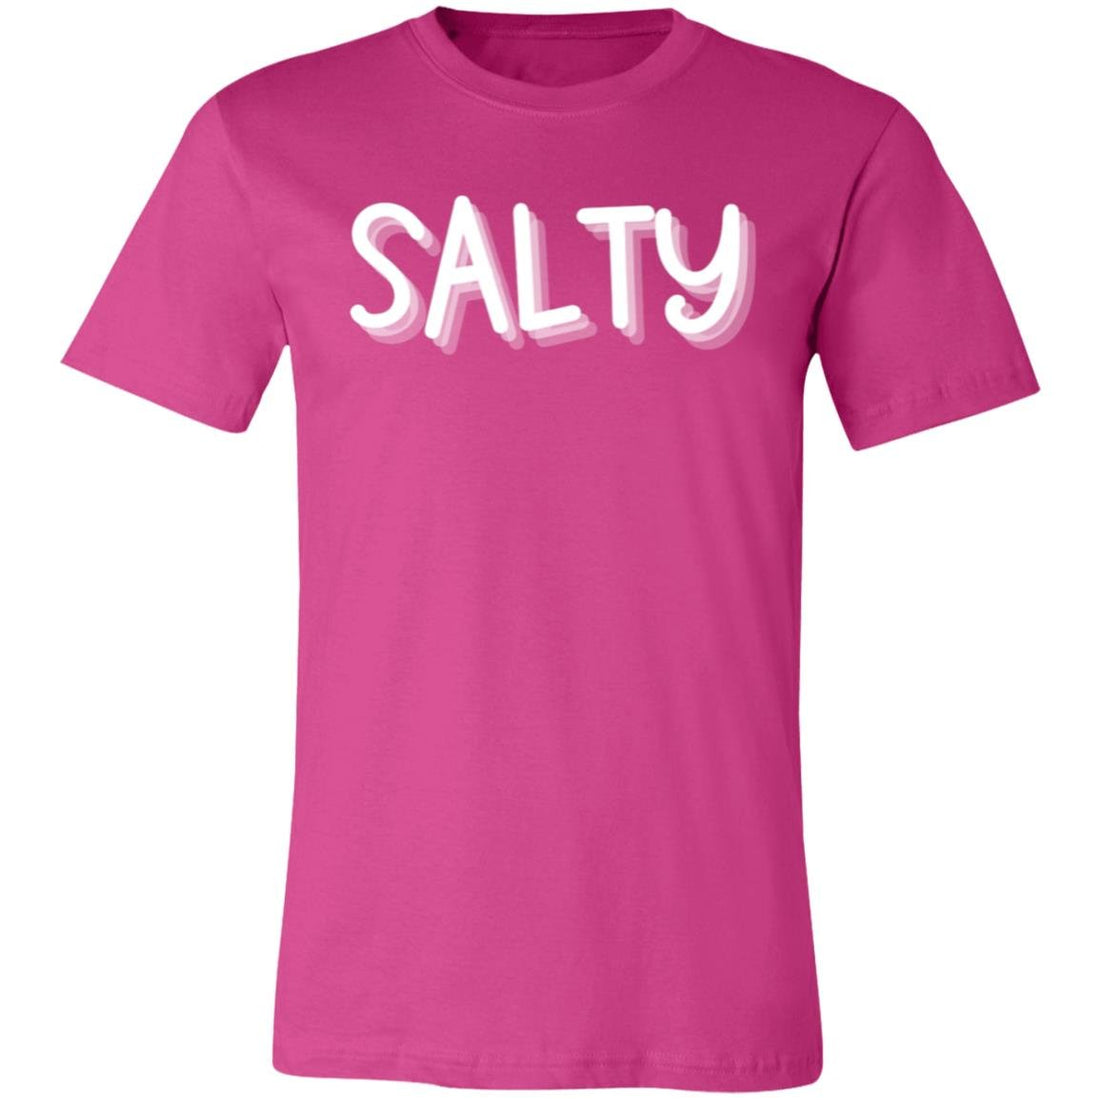 Salty T-Shirt - T-Shirts - Positively Sassy - Salty T-Shirt